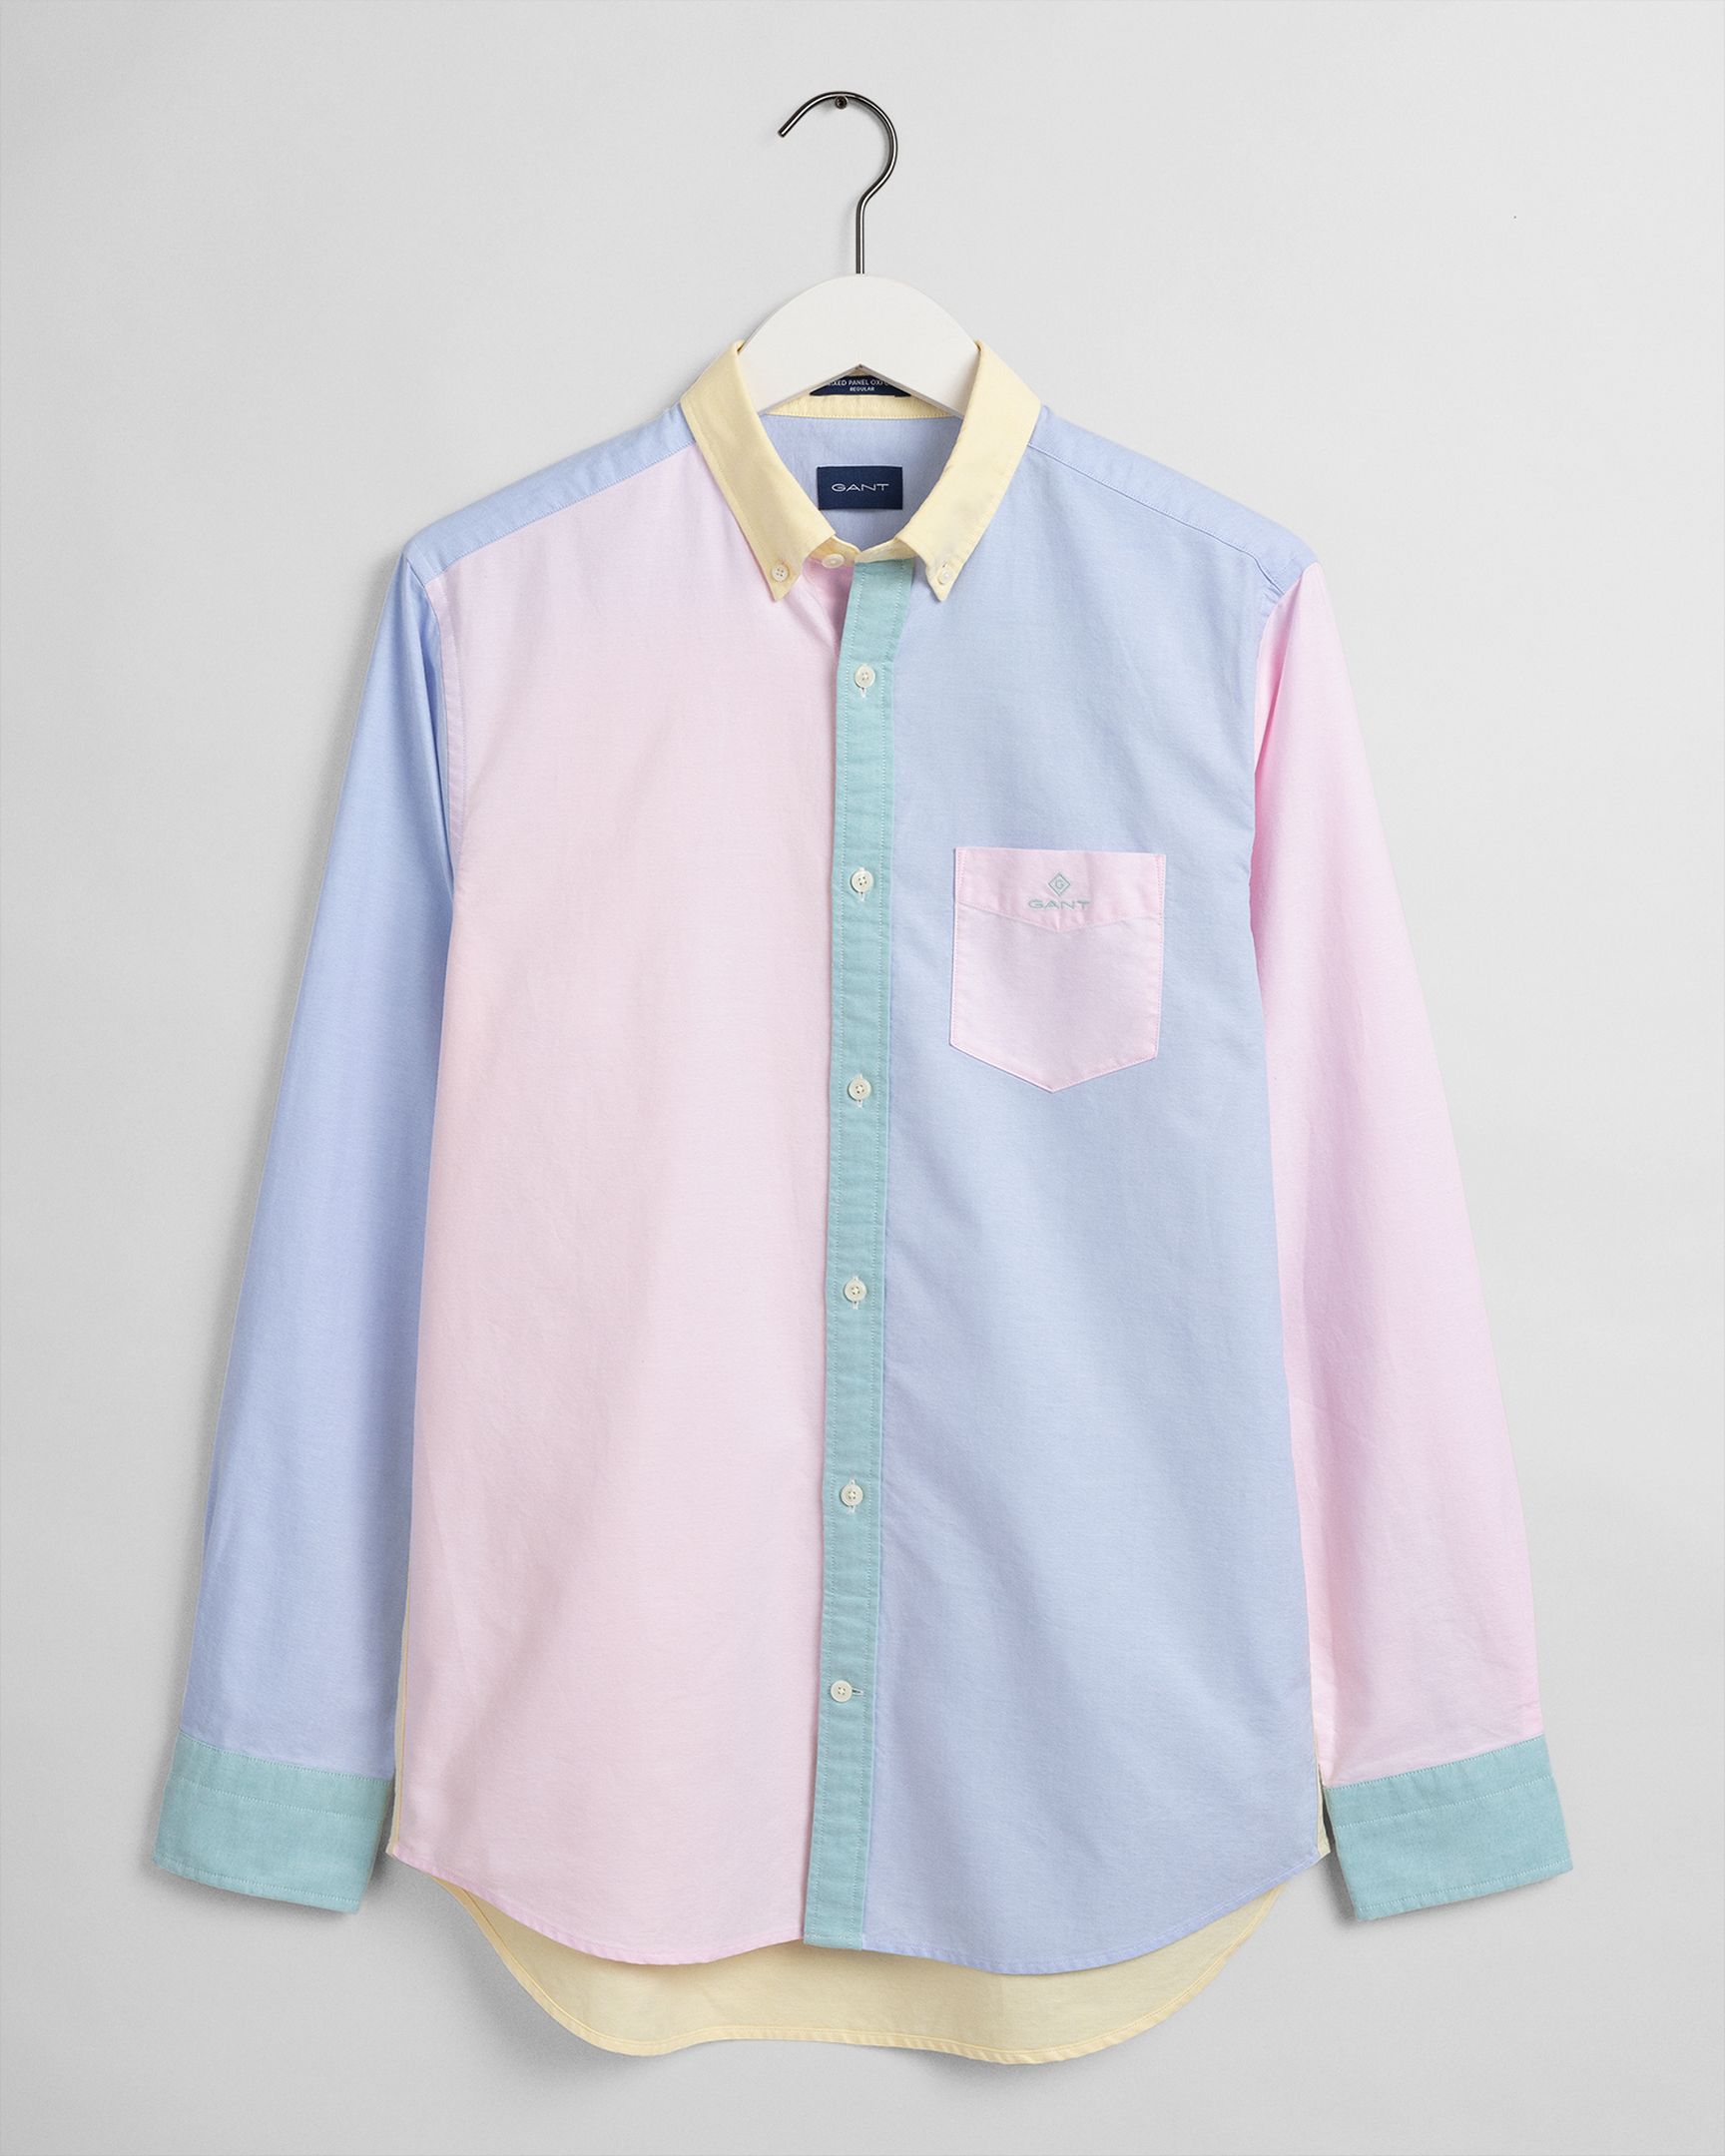 APNY Button-up w roll up sleeves Multi Color